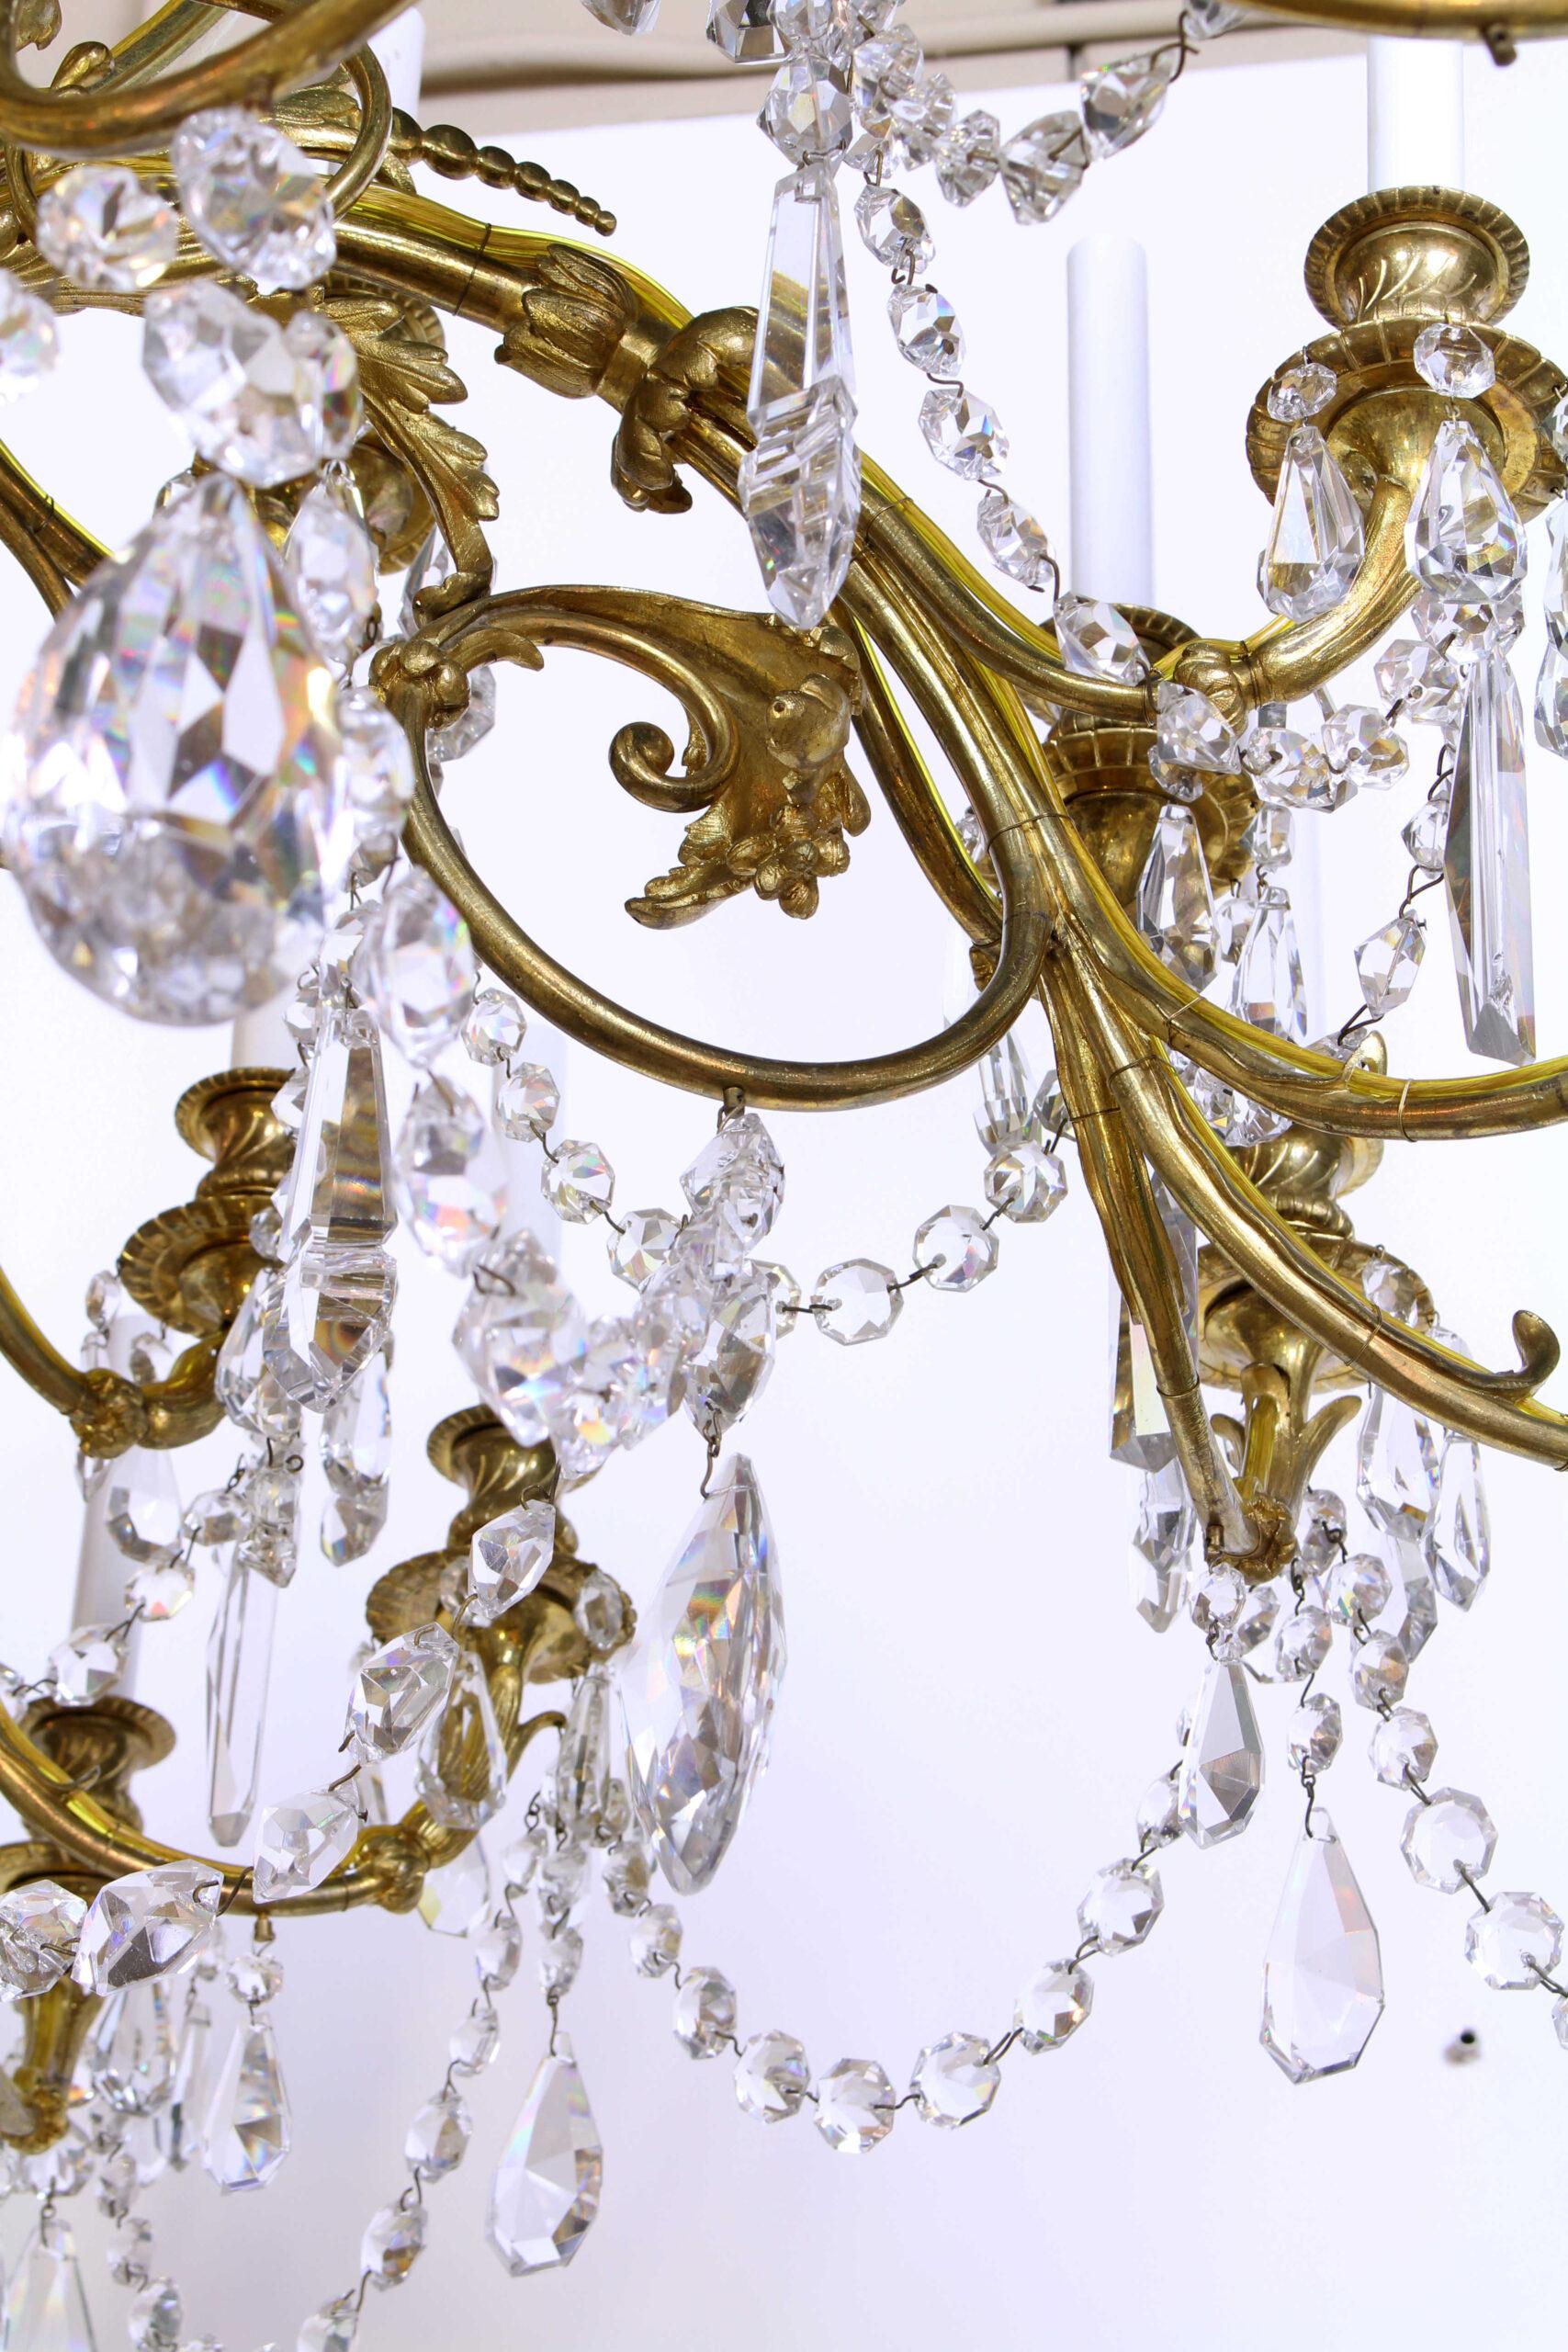 A magnificent late 19th century gilt bronze and crystal chandelier. 36 lights on alternating curved foliate arms. Central stem has greek key design seen on some similar styled Baccarat chandeliers of the late 19th Century. High lustre crystals hang